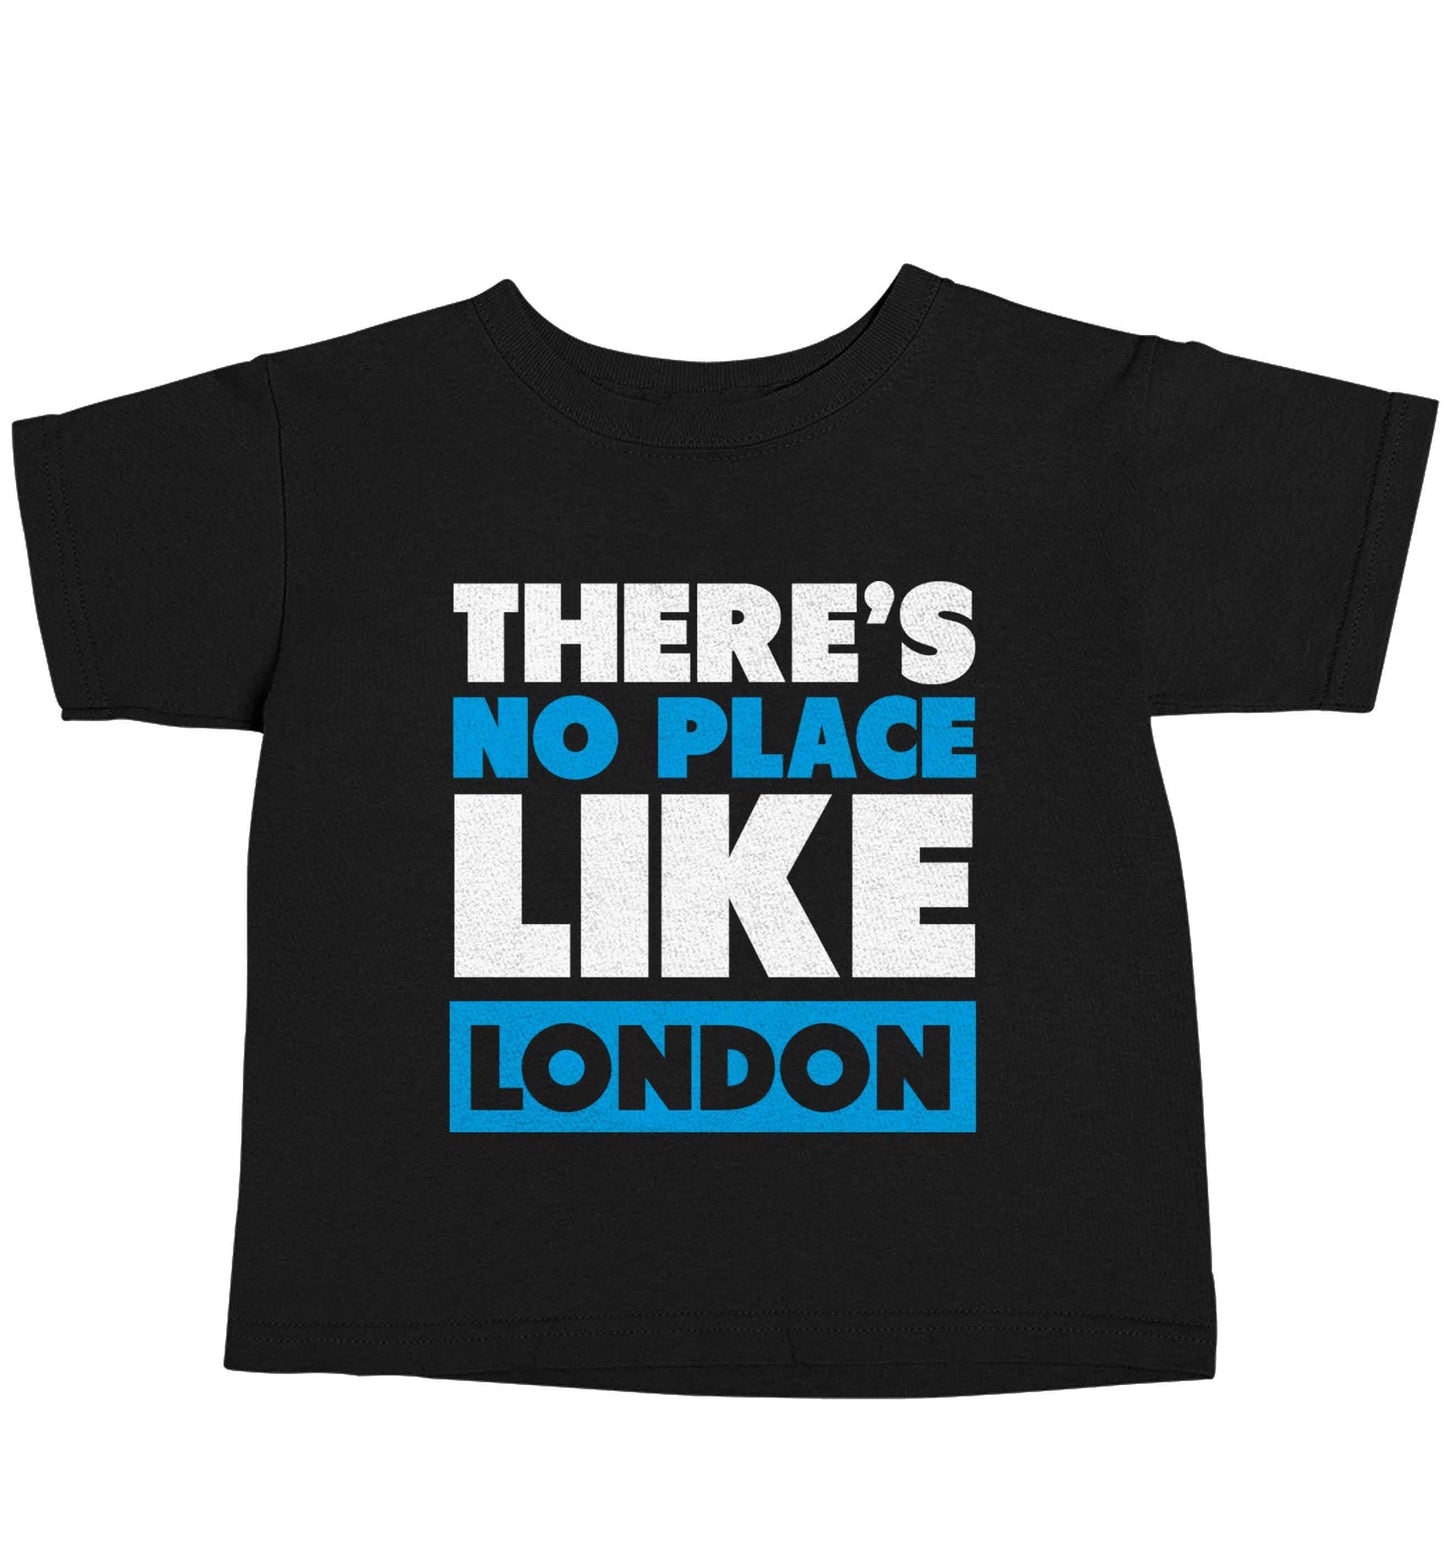 There's no place like England Black baby toddler Tshirt 2 years